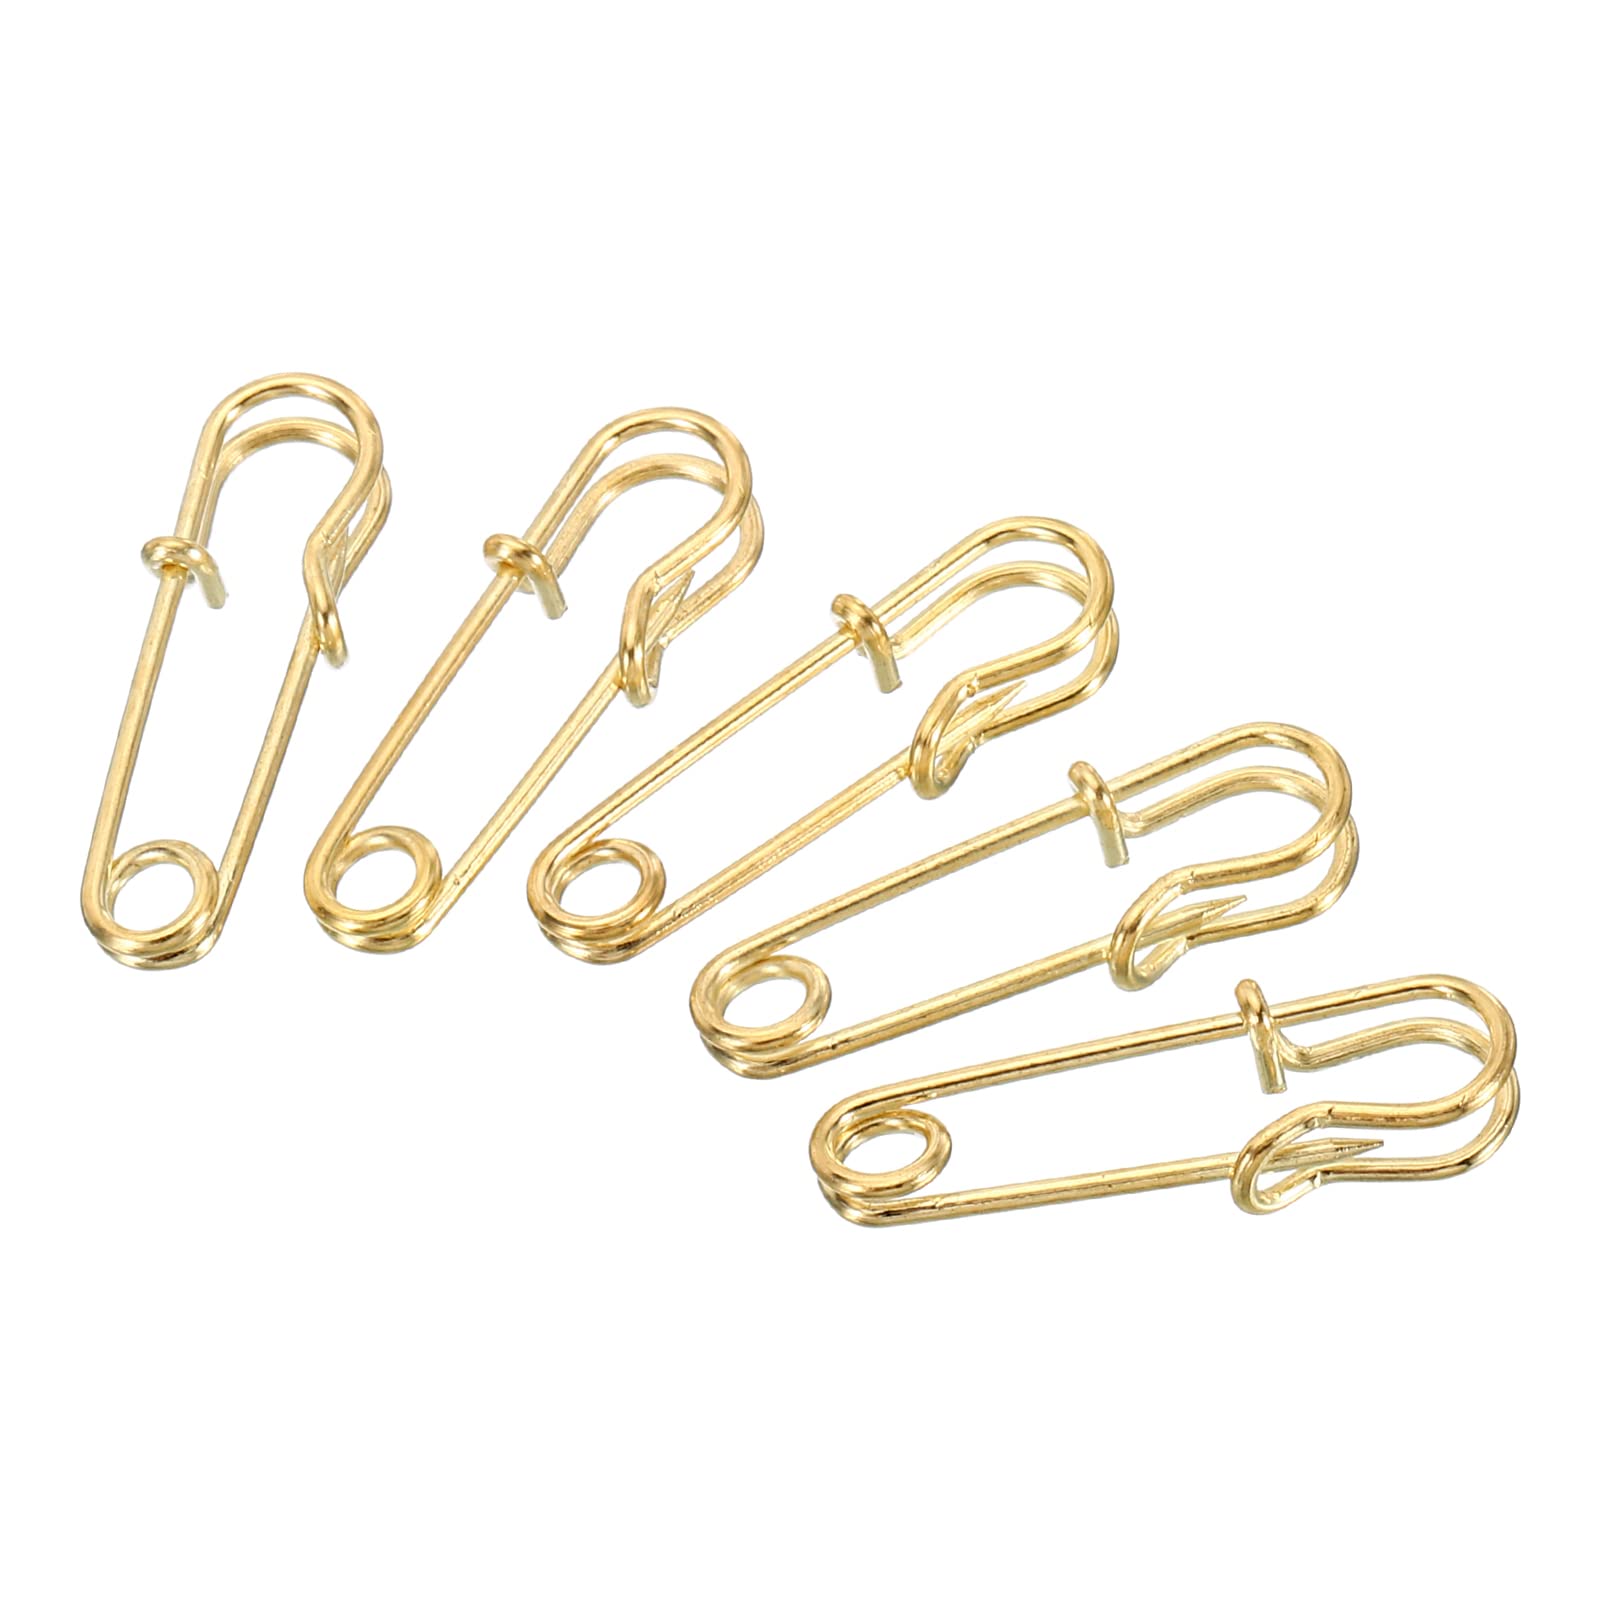 Italian Large Gold Safety Pin - 4 - Decorative Pins - Closures - Buttons